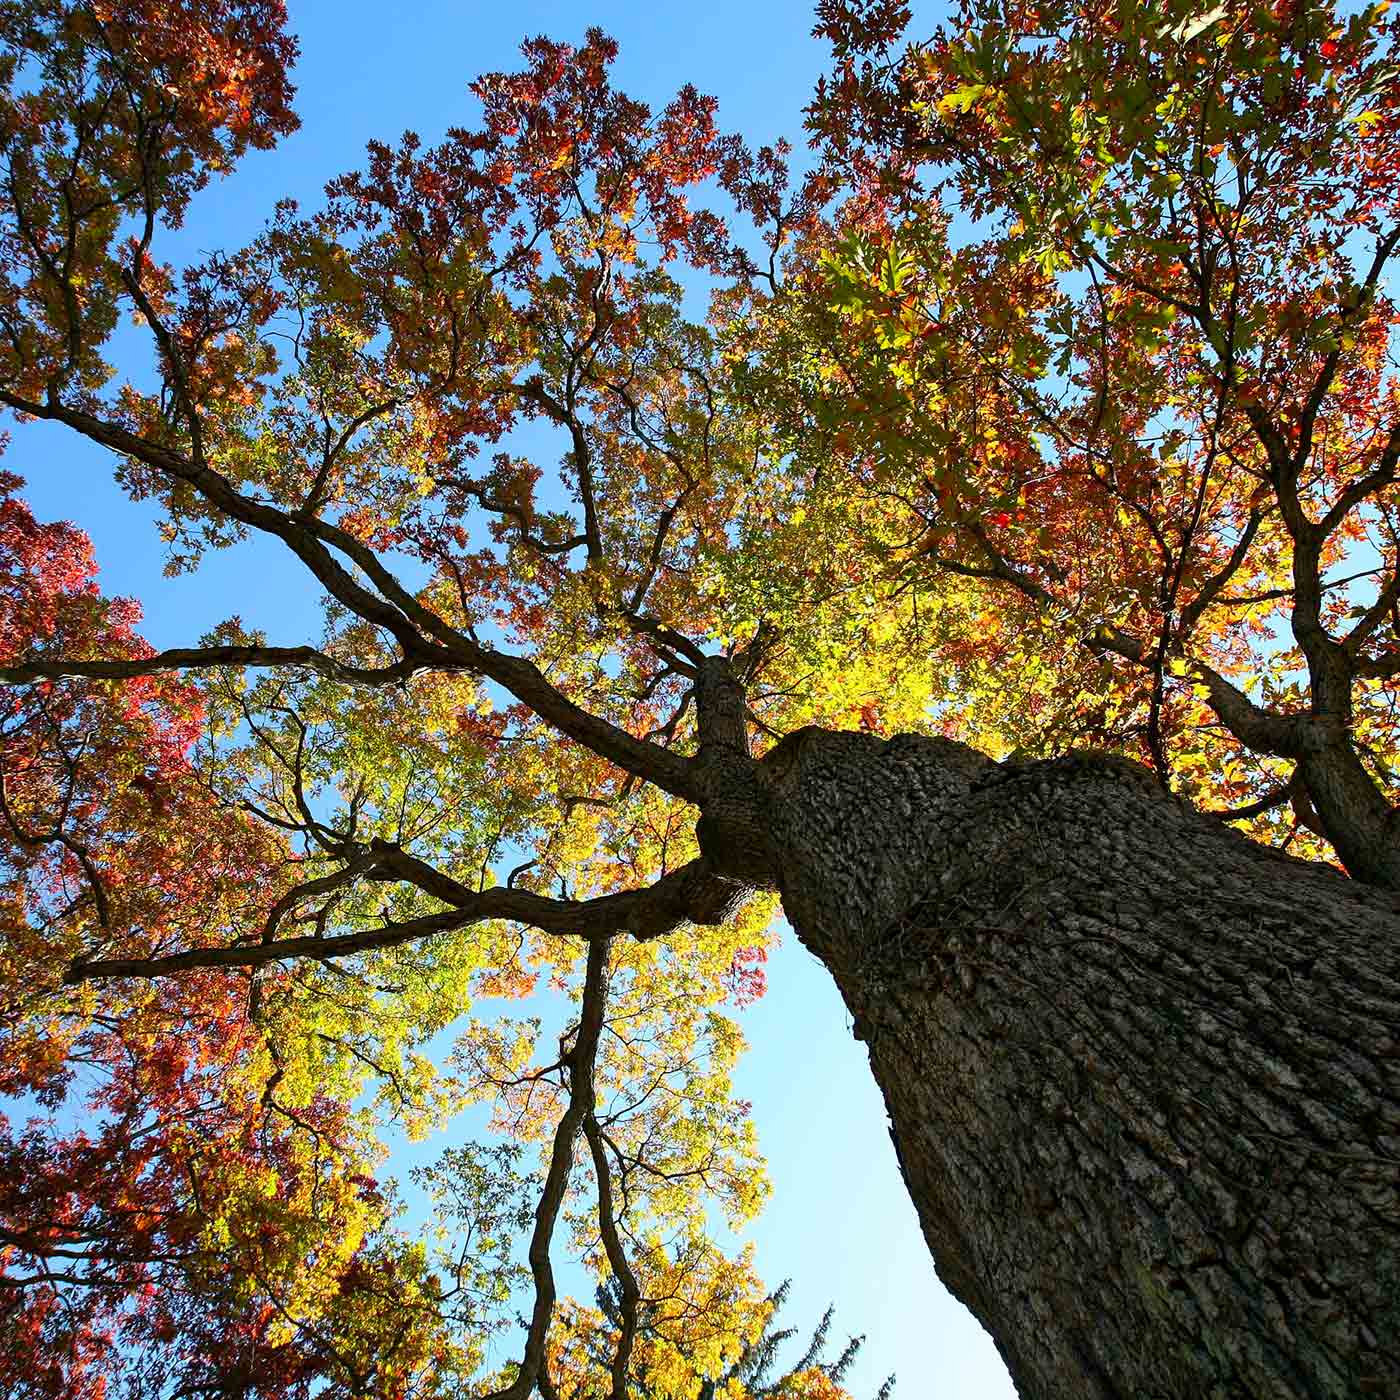 Looking up the trunk of a tree with brightly colored autumn leaves